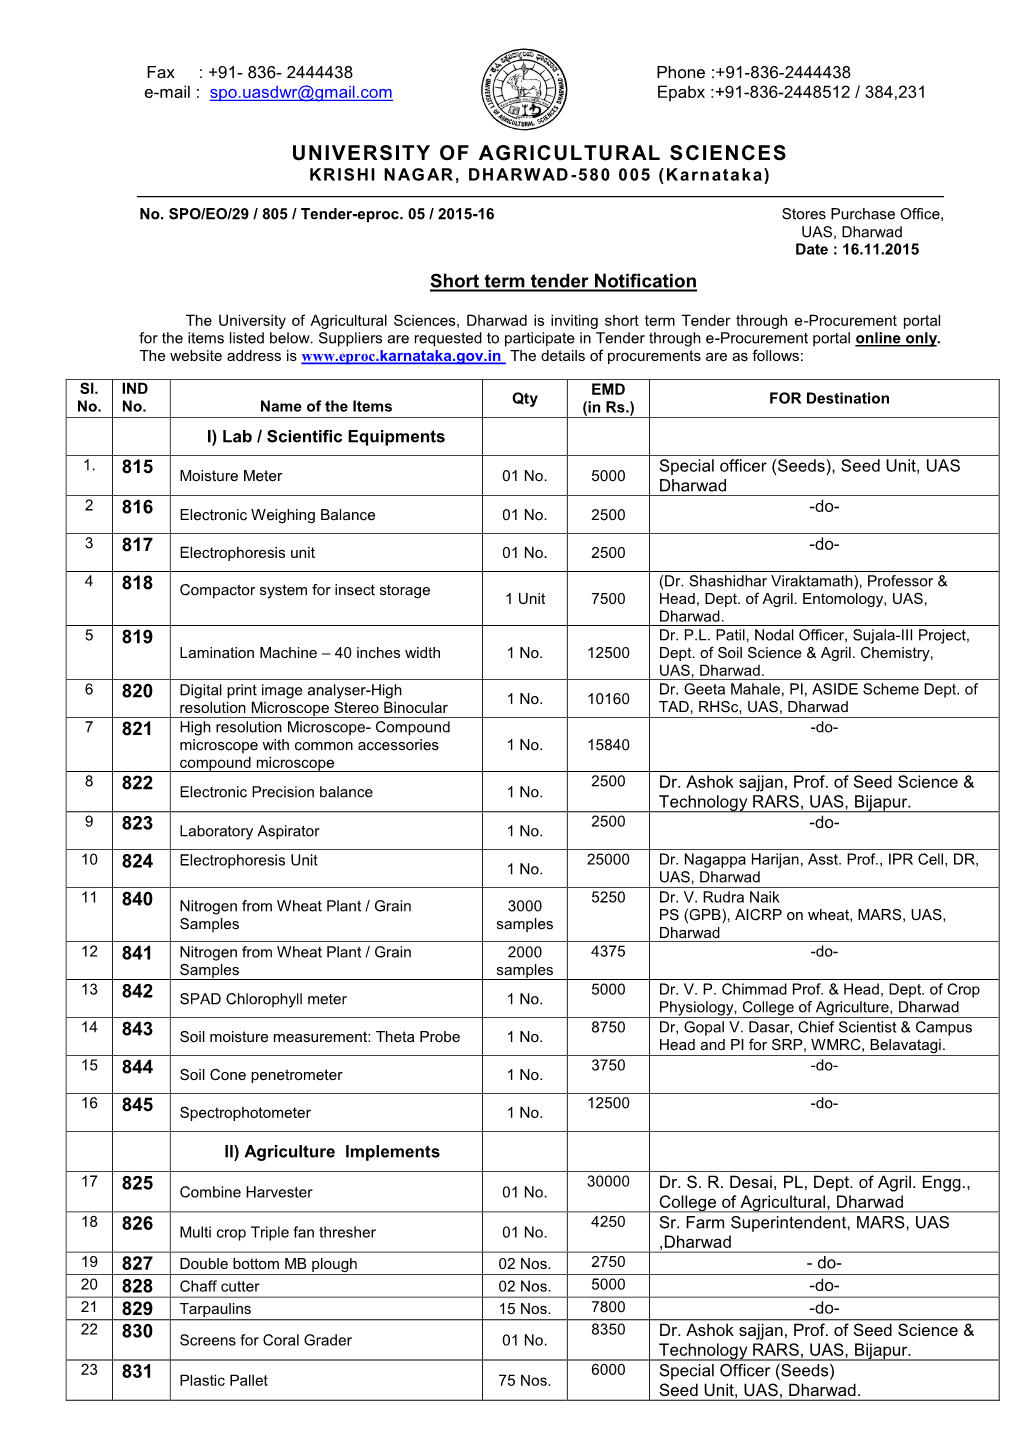 University of Agricultural Sciences, Dharwad Is Inviting Short Term Tender Through E-Procurement Portal for the Items Listed Below